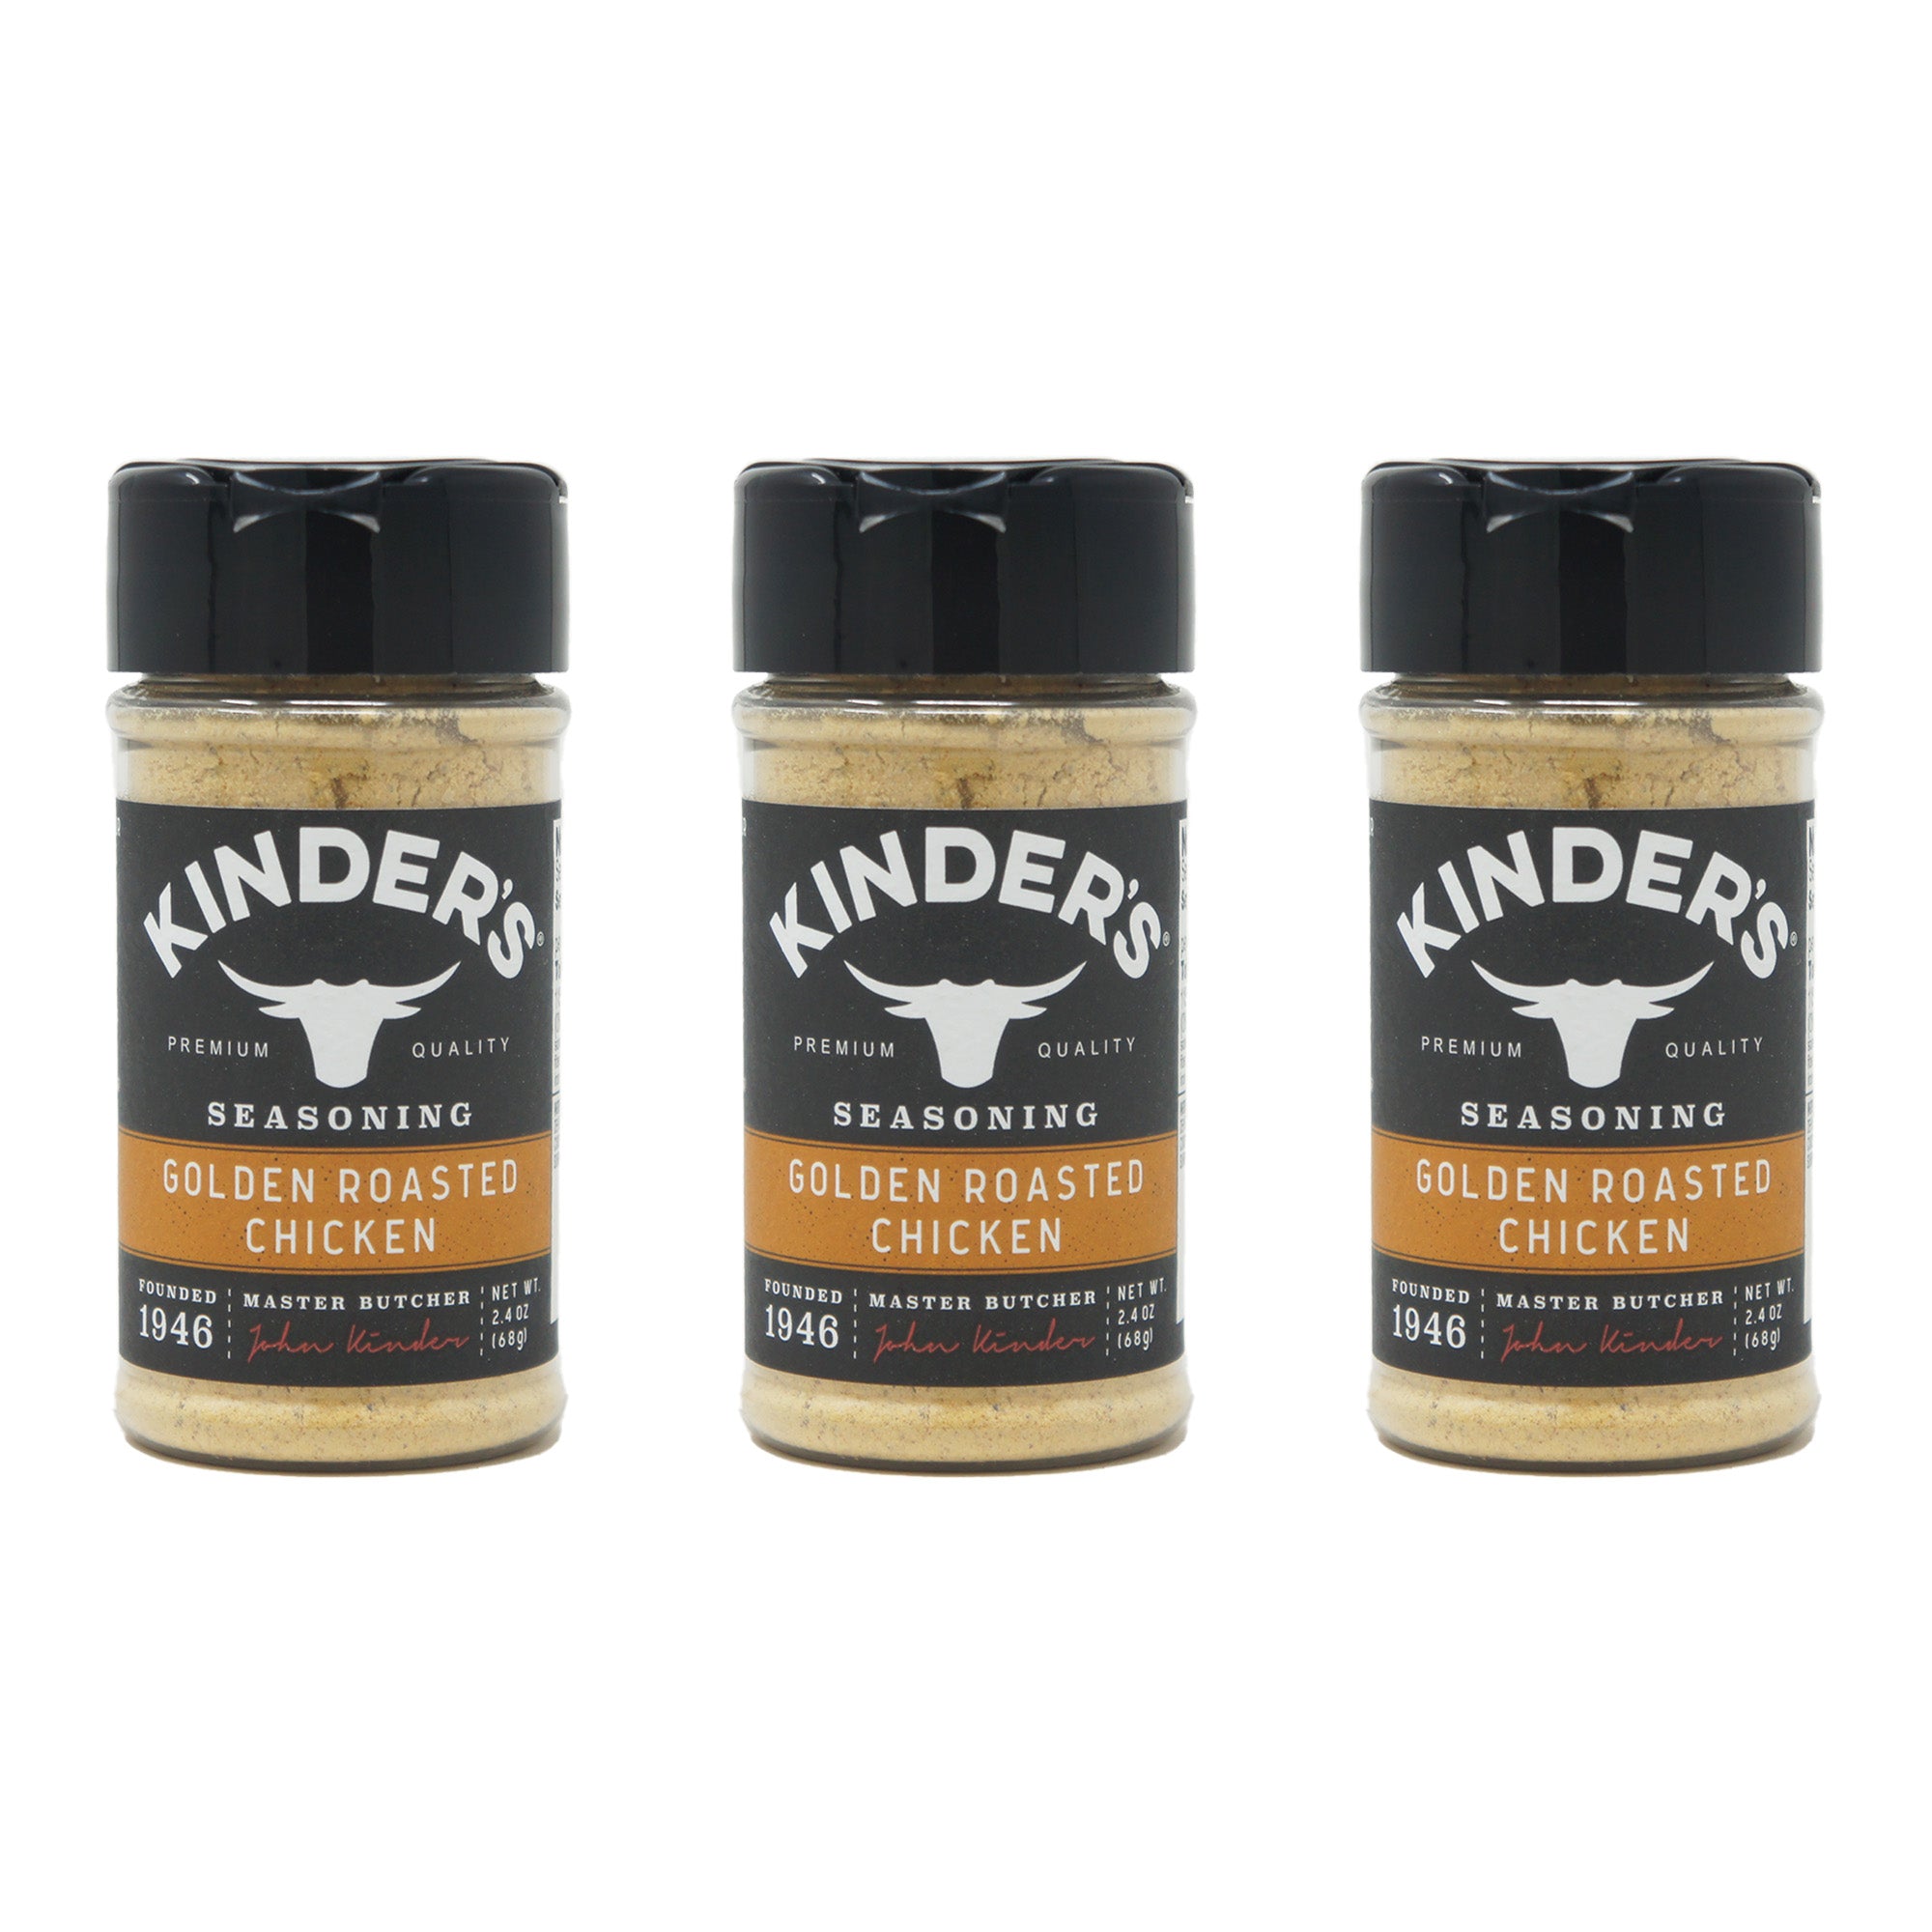 Kinder's Golden Roasted Chicken Seasoning, 3.5 Ounce (3 Pack)